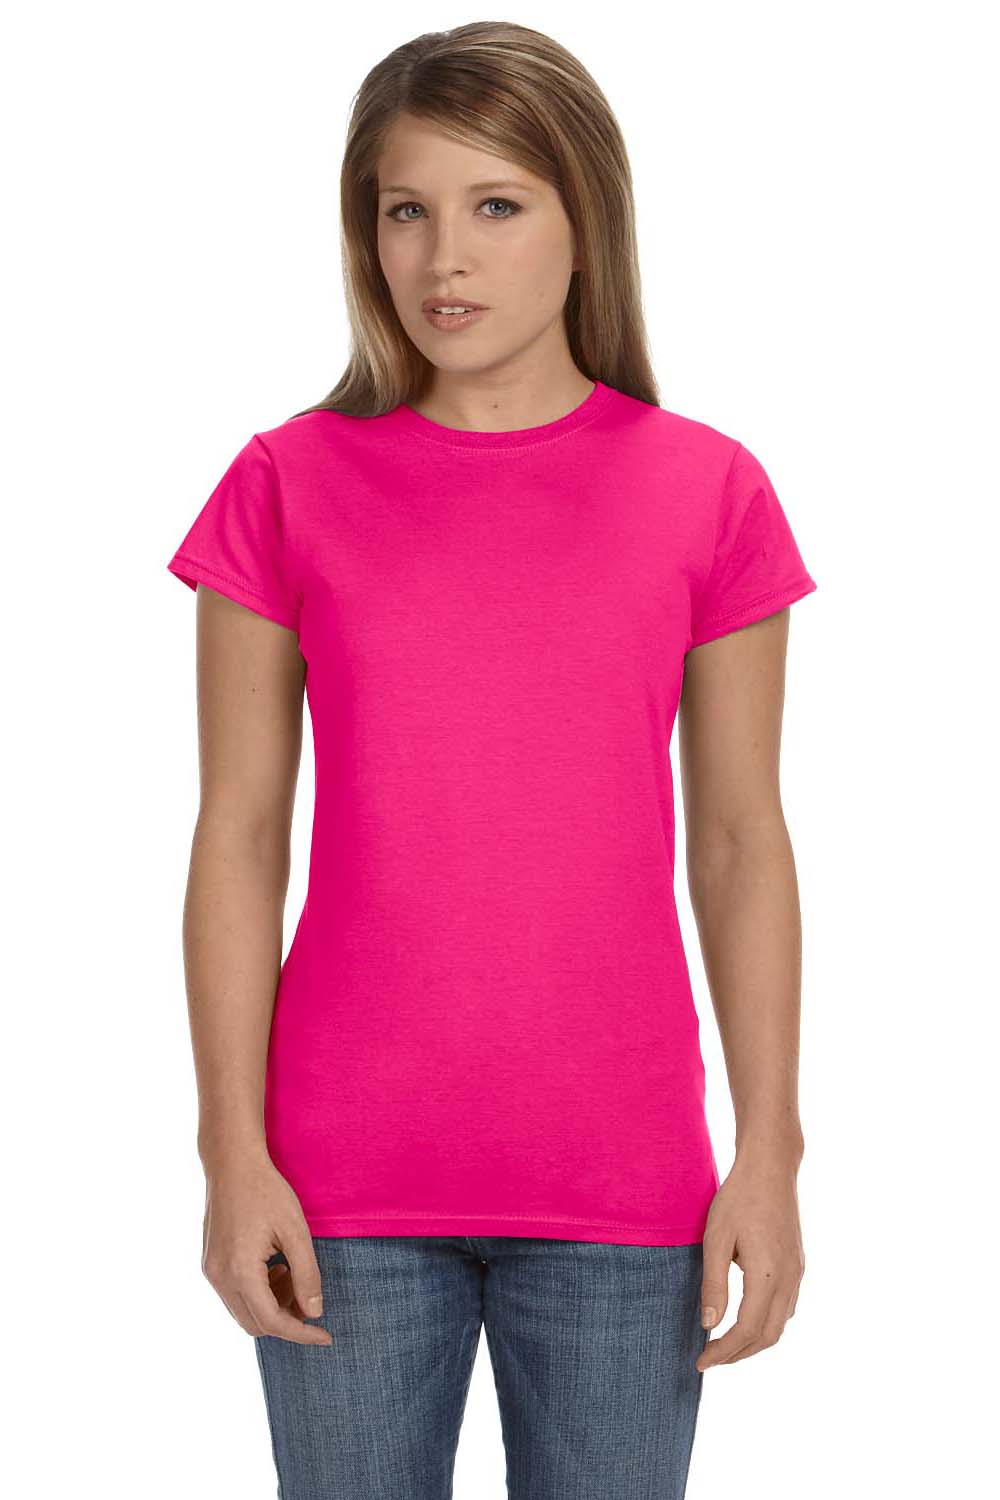 Gildan G640L Womens Softstyle Short Sleeve Crewneck T-Shirt Antique Heliconia Pink Front